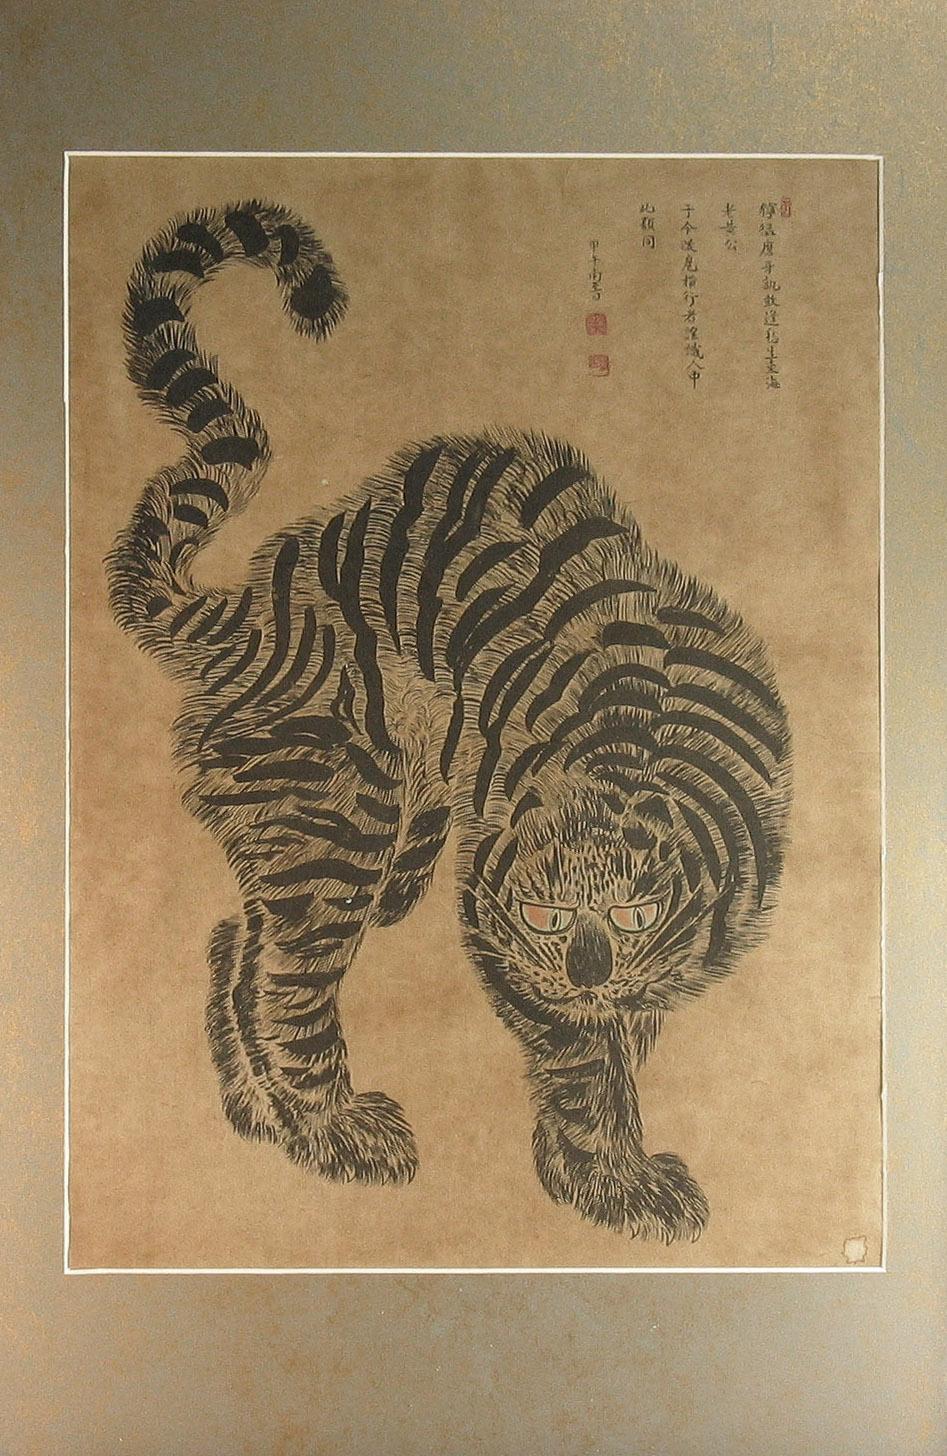 A Korean scroll of prowling tiger
20th century.

Size, 17 1/4 x 12 1/2in. (43.8 x 31.7 cm.)
Framed, 24 3/8 x 17 1/2 in. (62 x 44.5 cm.)

Painted in ink on buff paper of a glaring tiger with its tail flicked over its back, based on a painting